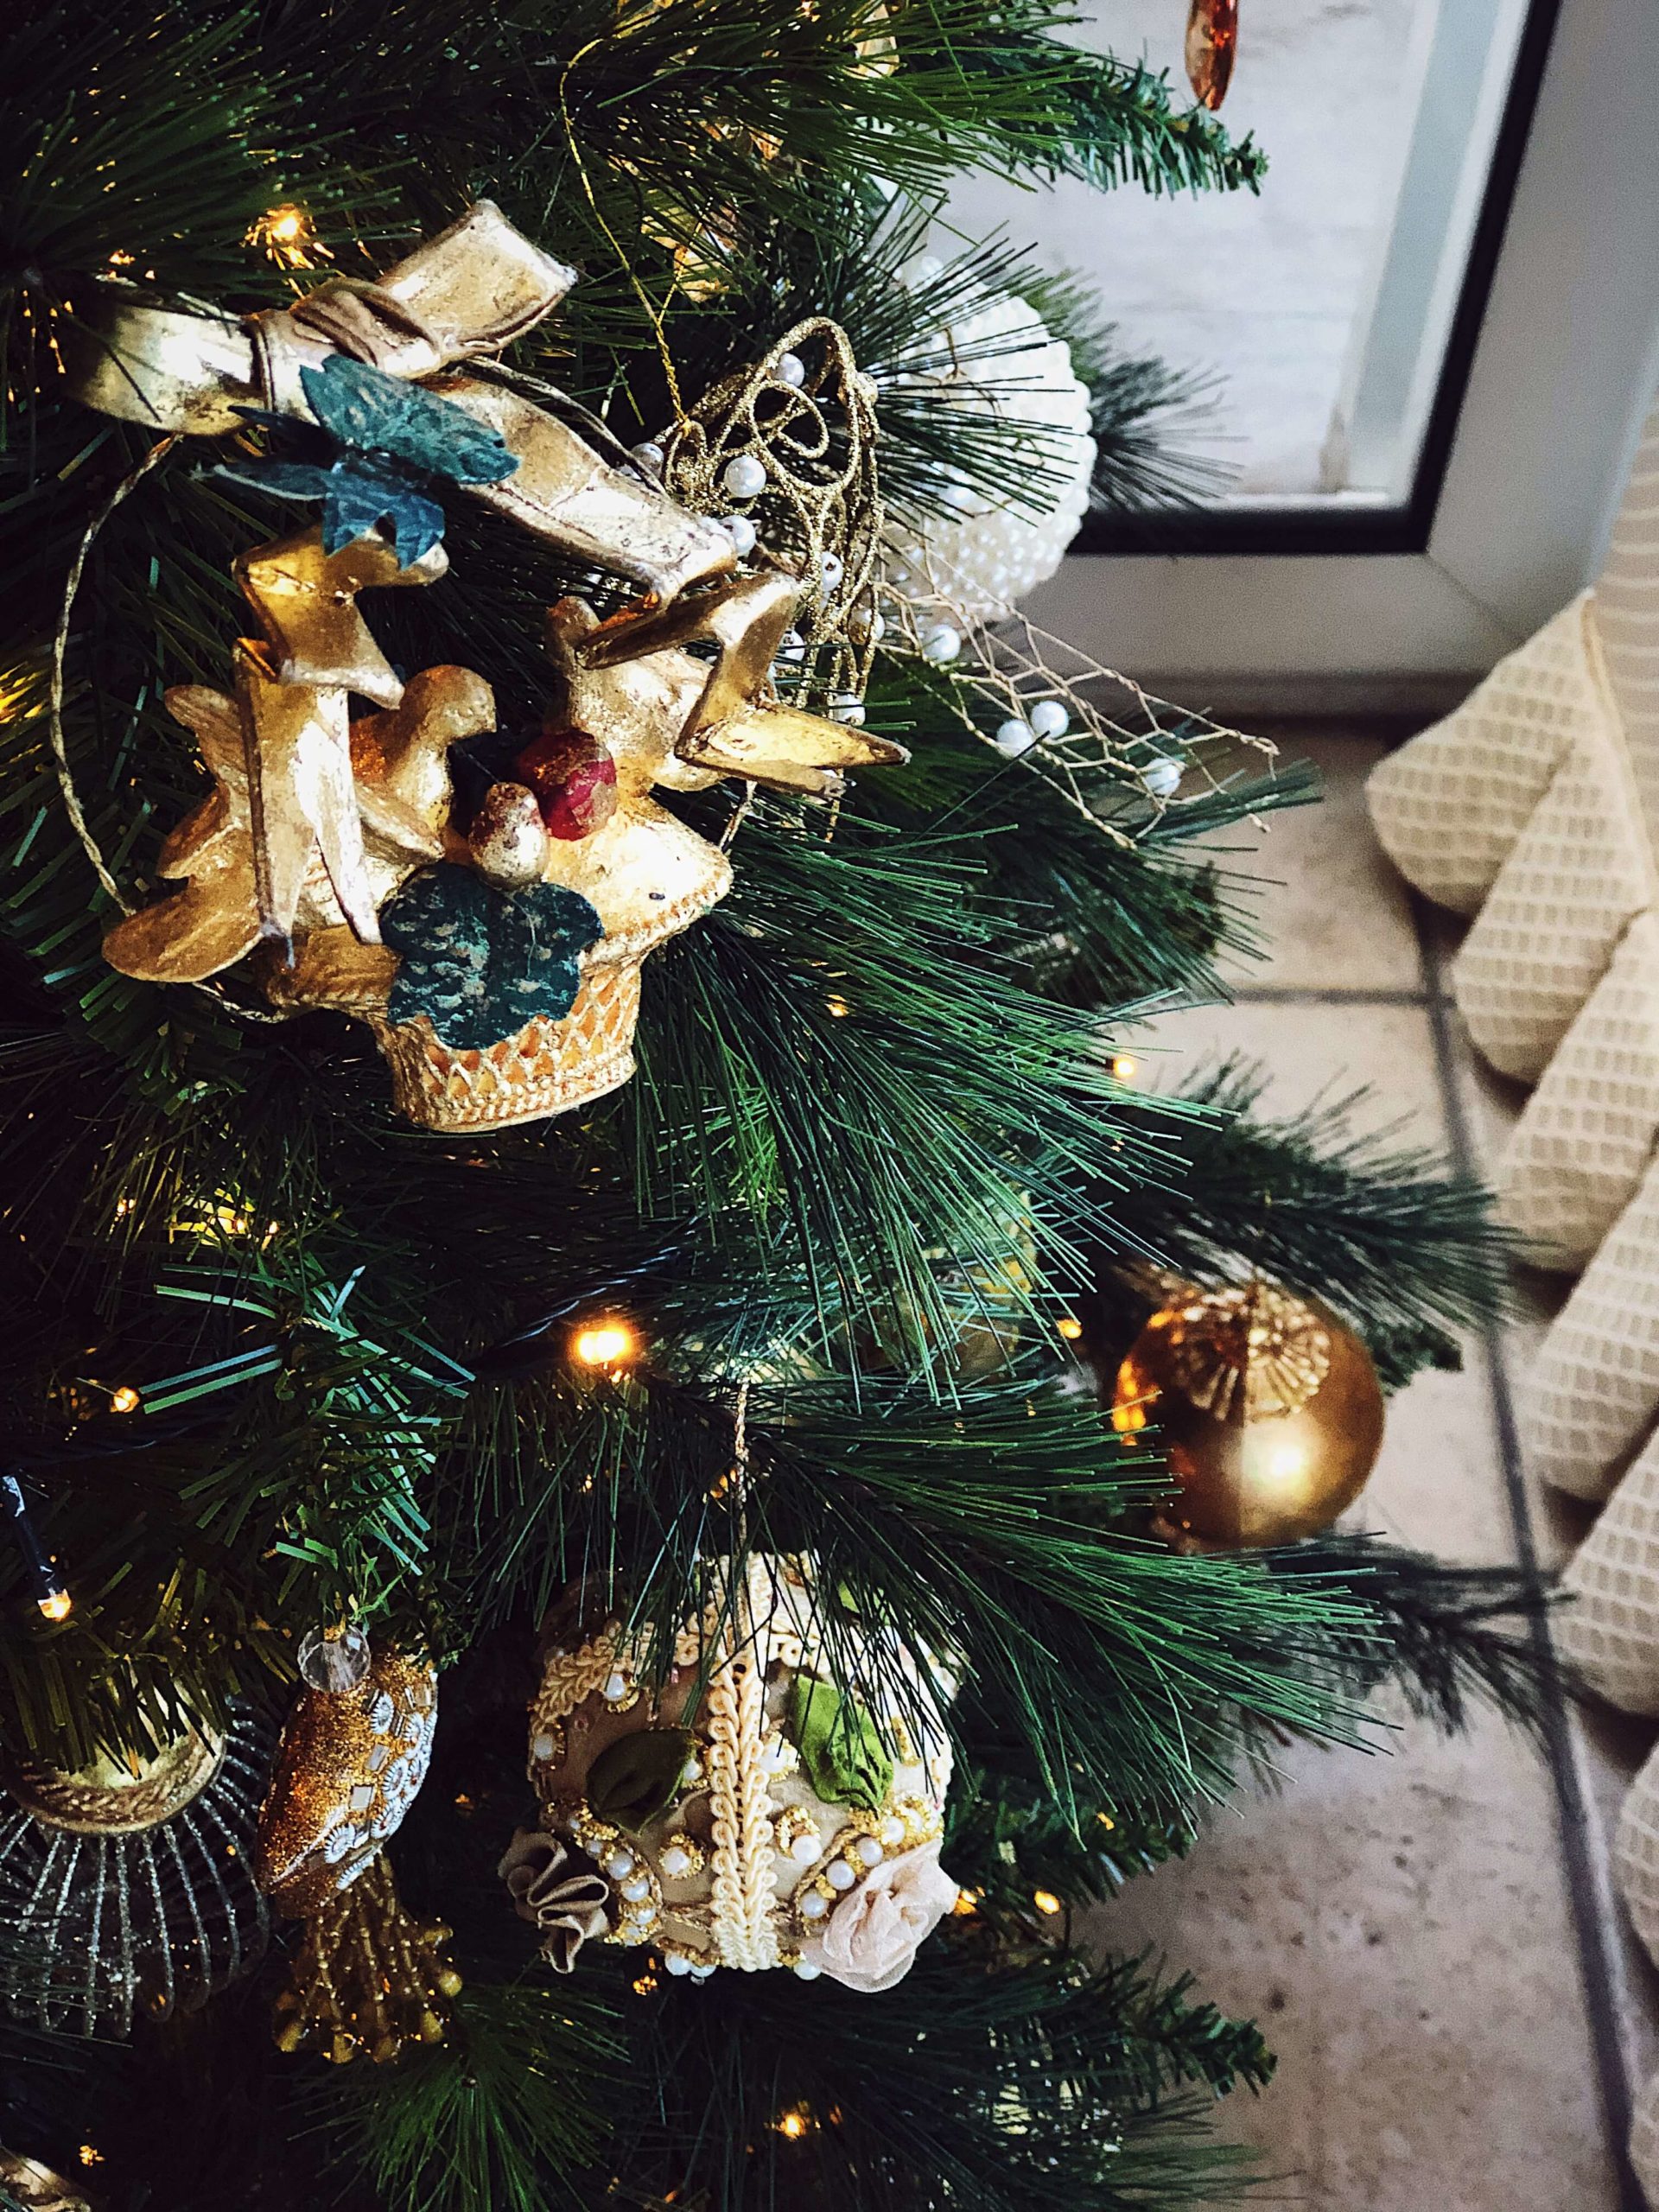 Italian Christmas tree with golden decorations